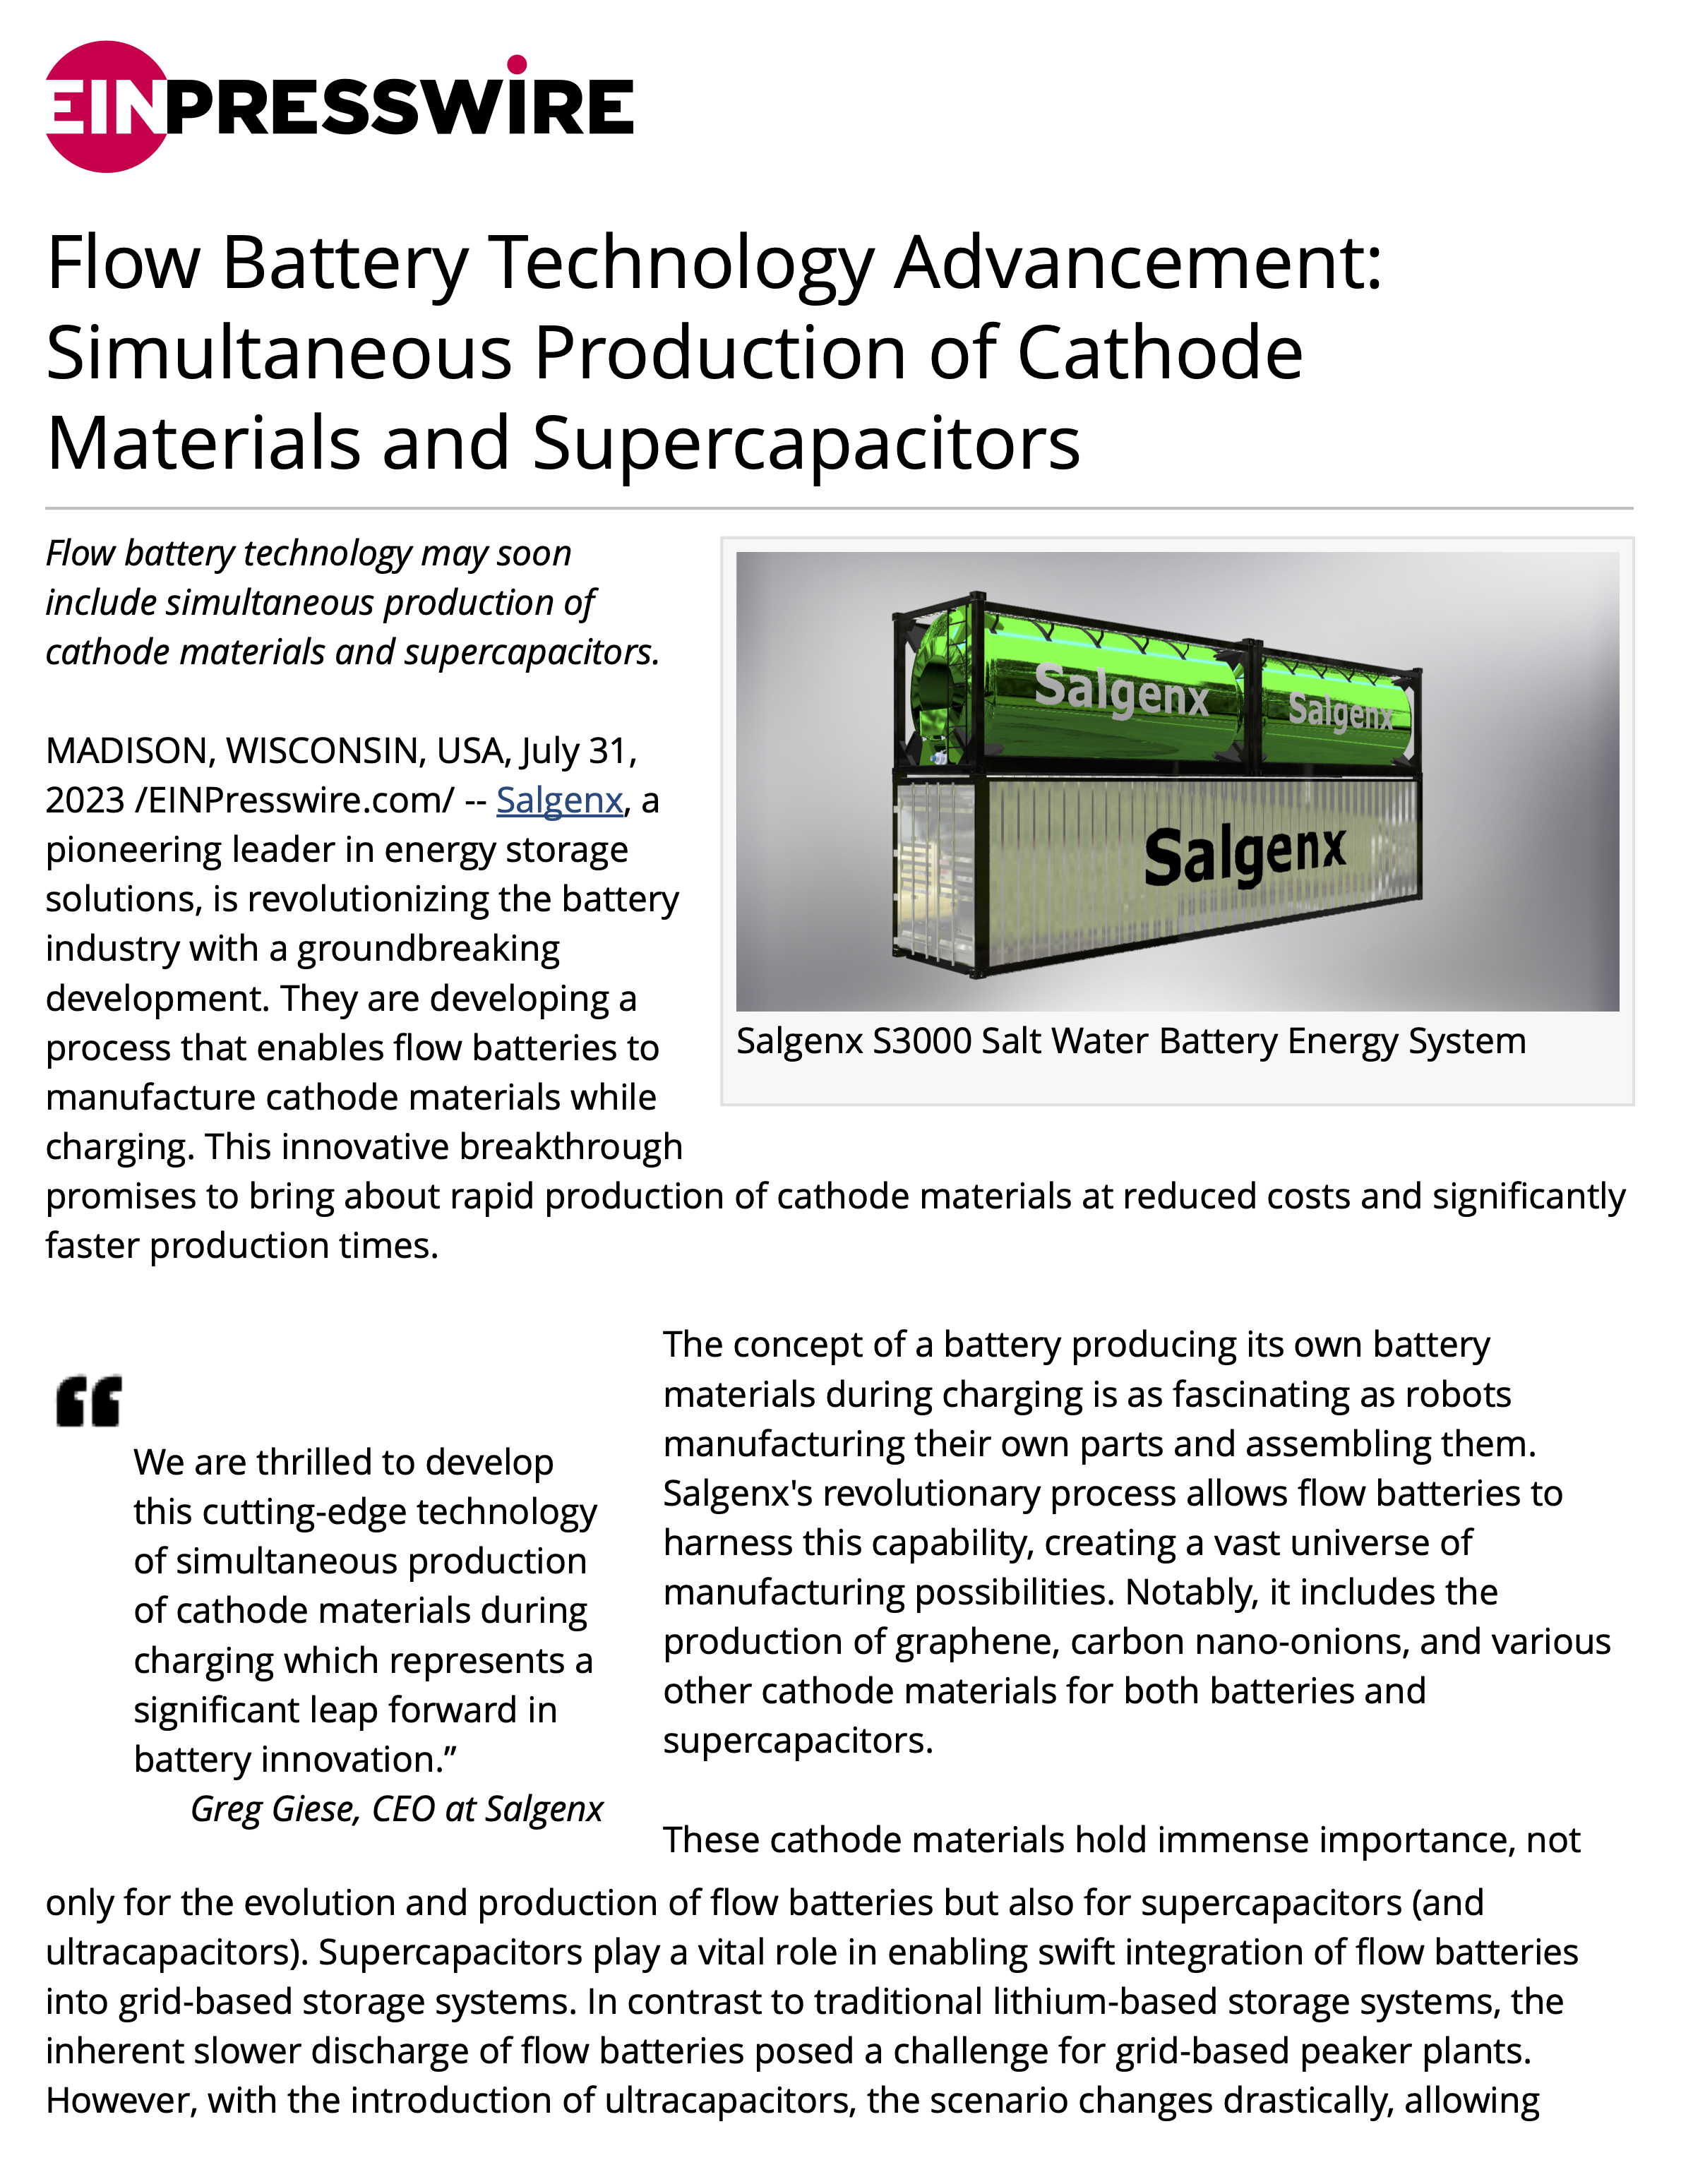 Flow Battery Technology Advancement: Simultaneous Production of Cathode Materials and Supercapacitors